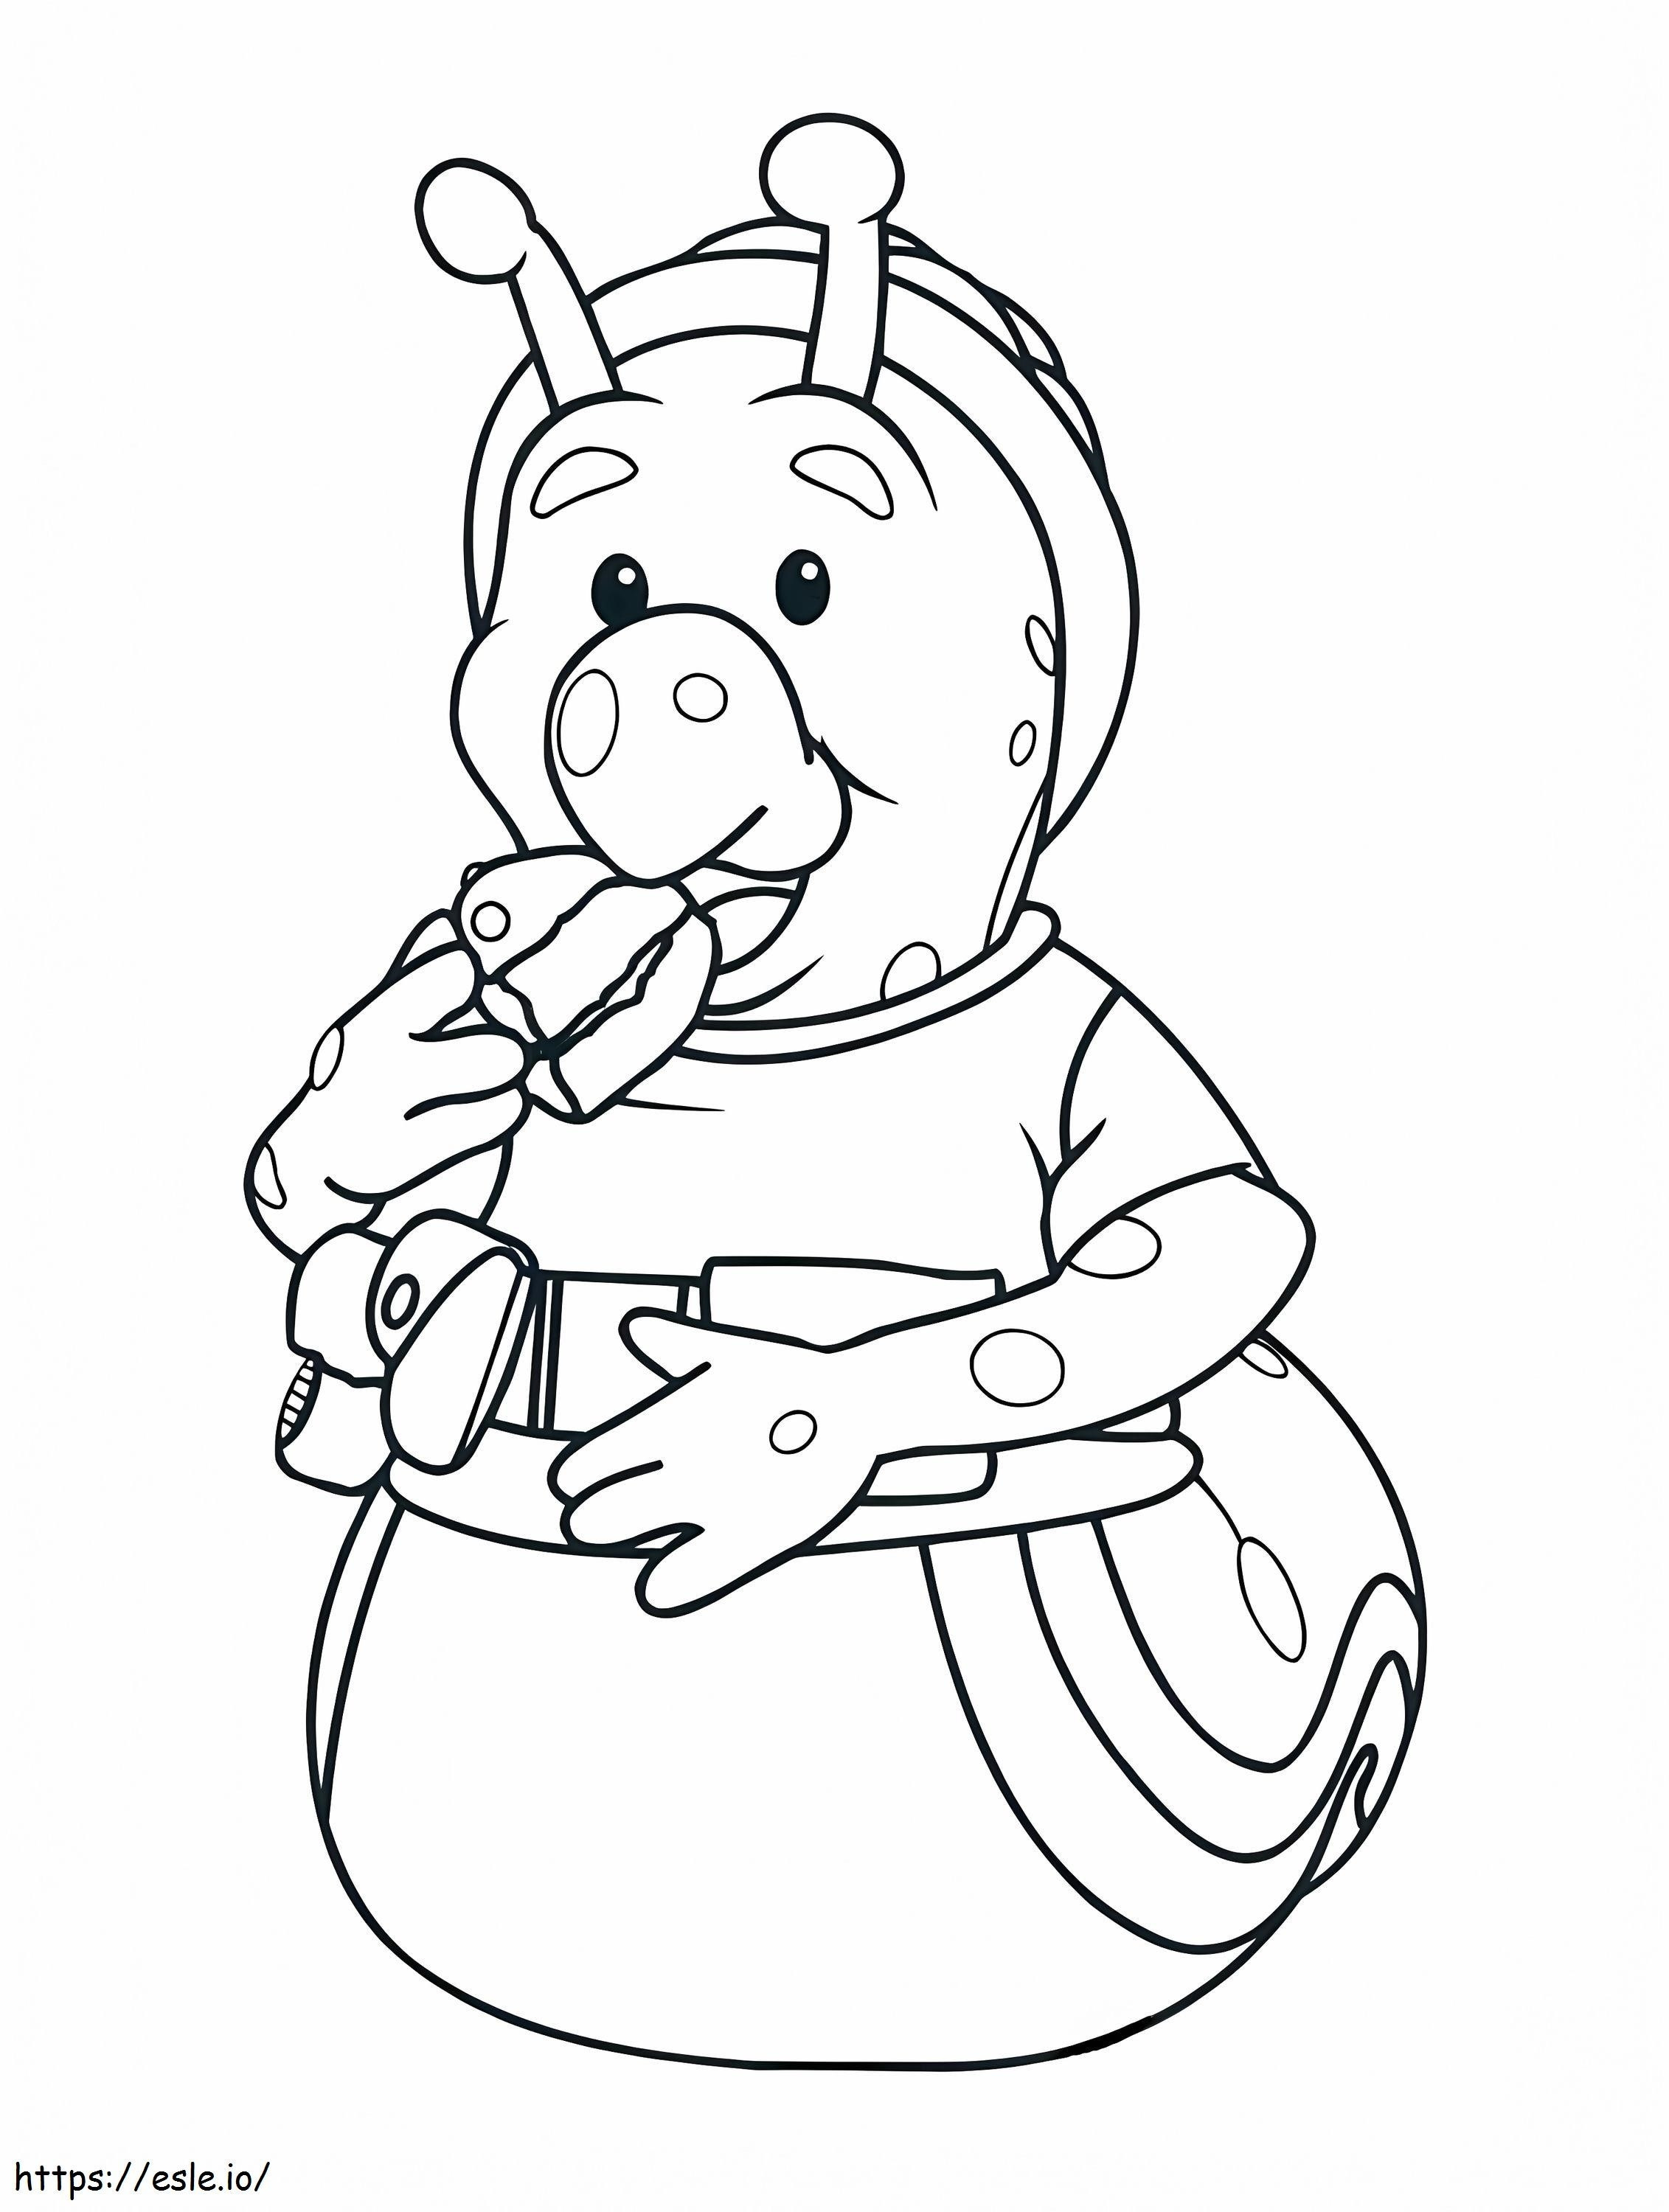 Fdsgsgse coloring page